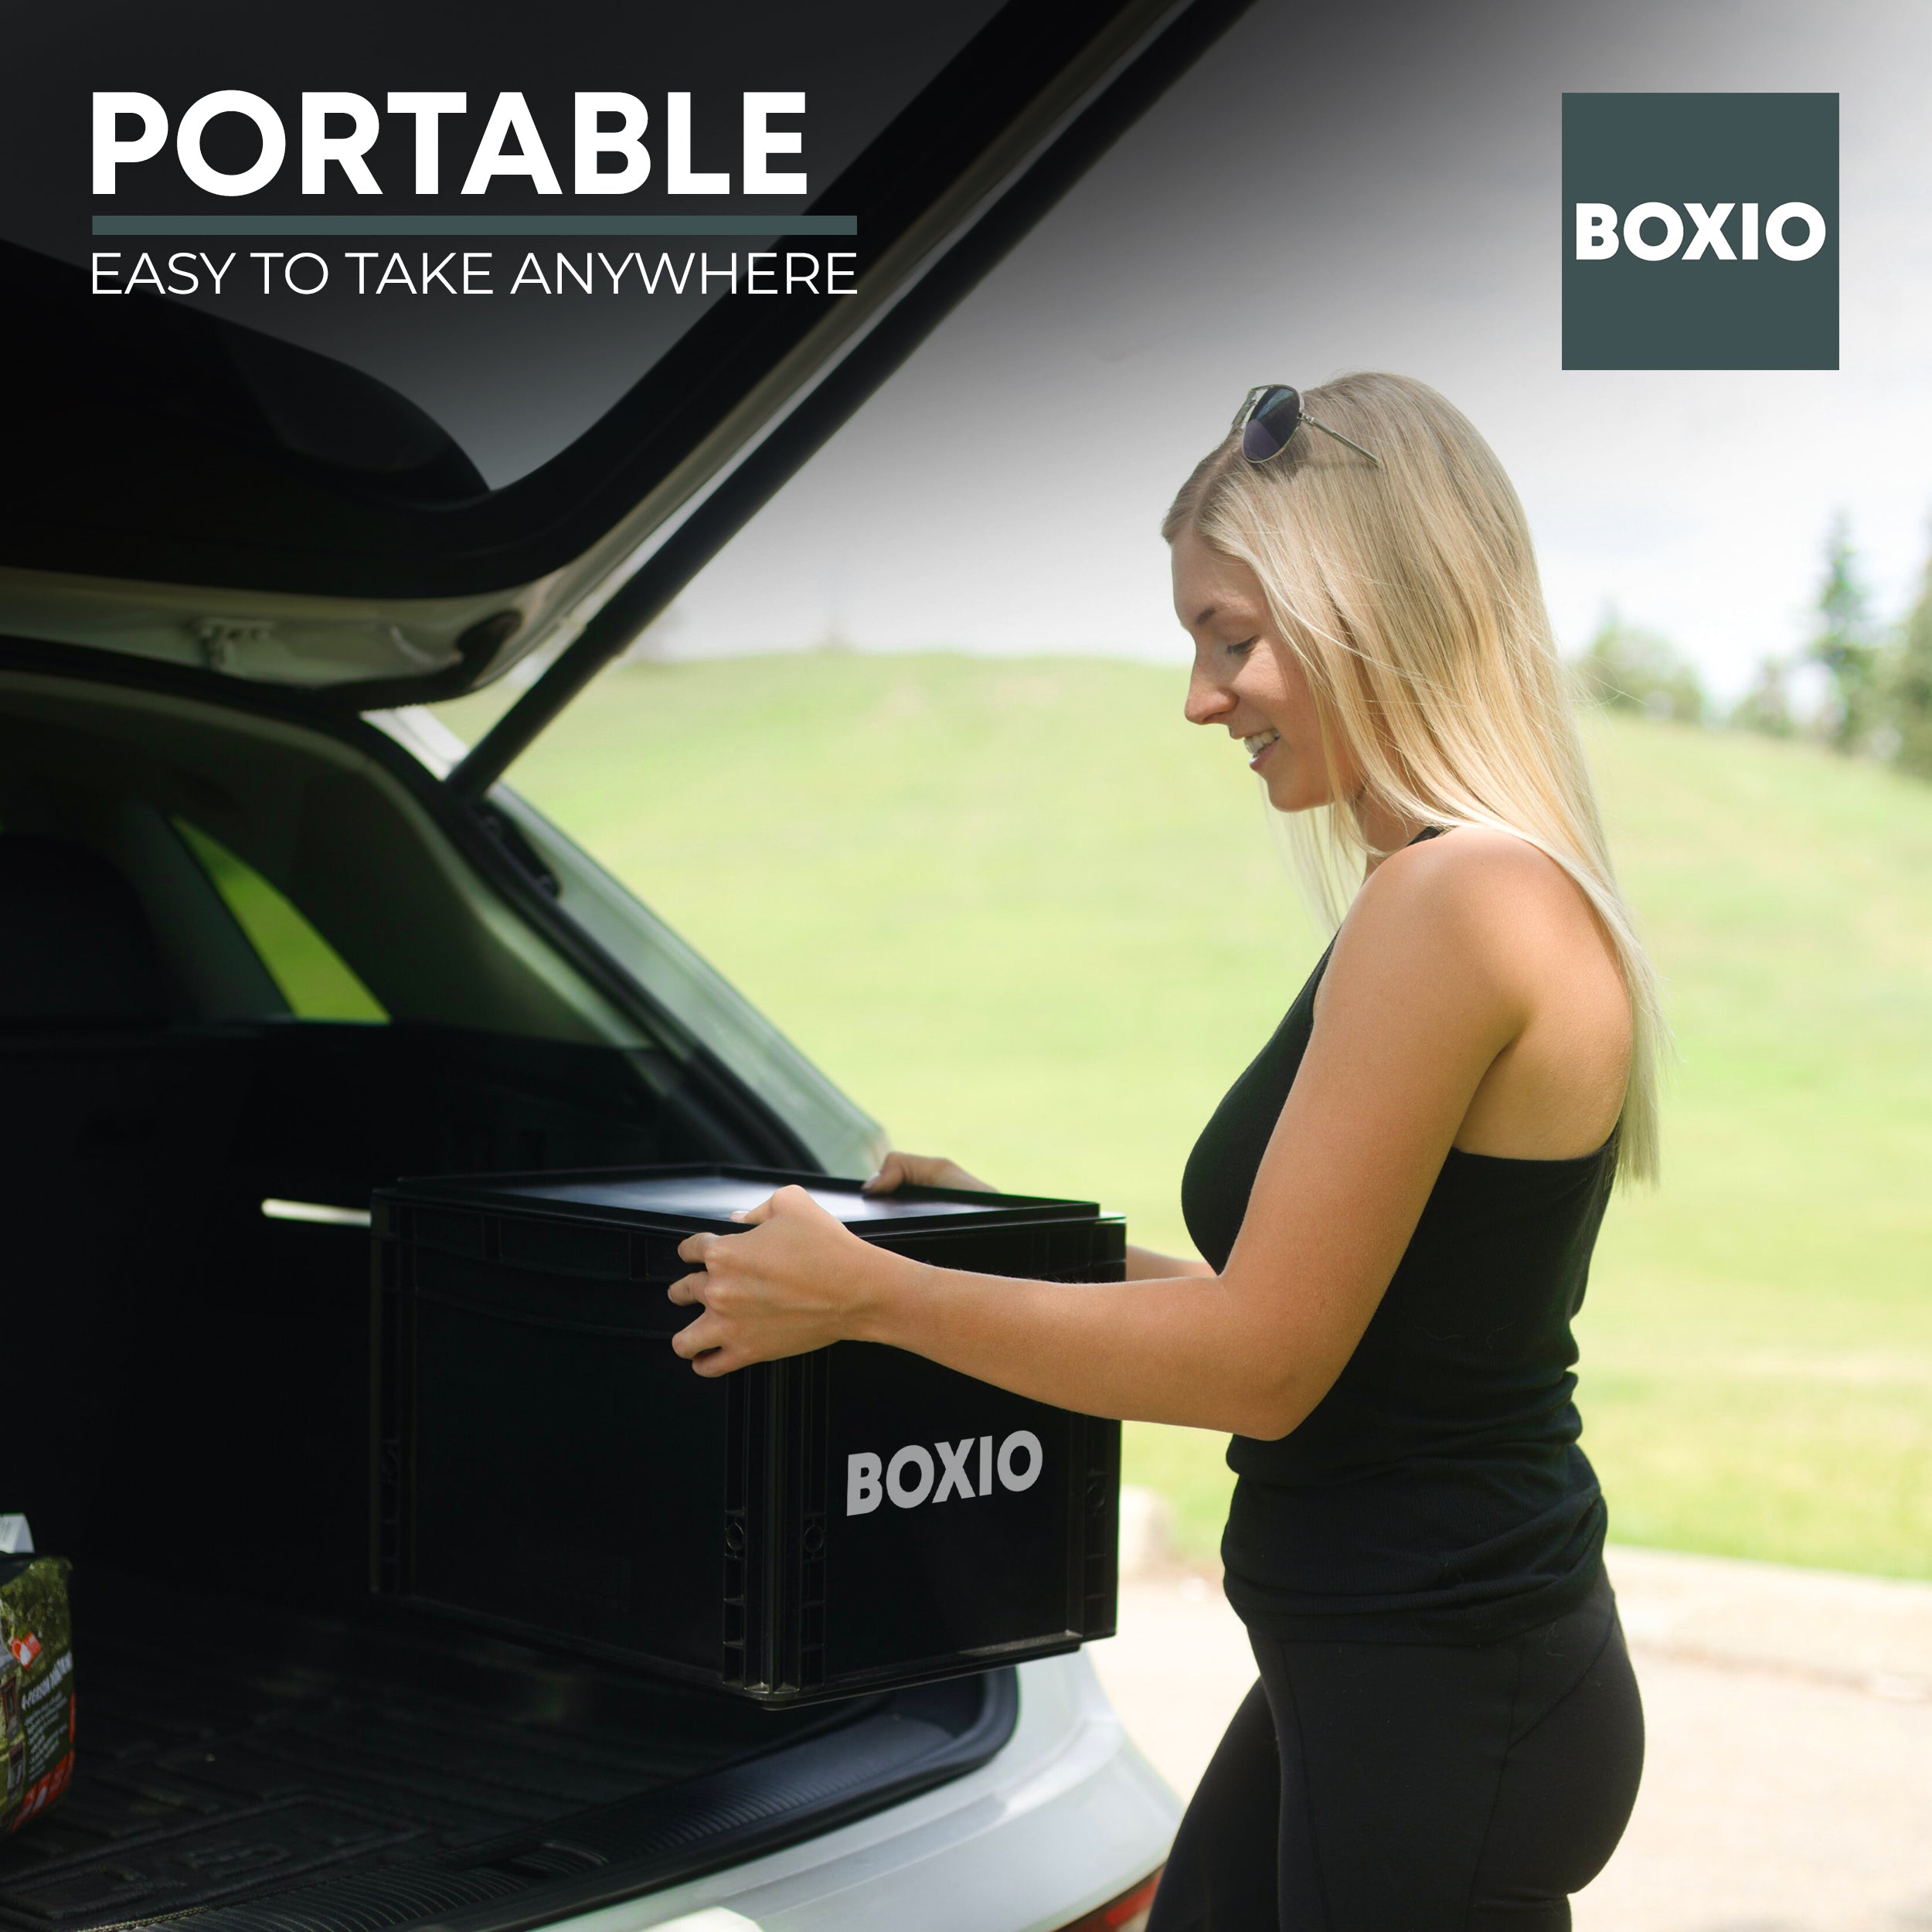 BOXIO Portable Toilet - Convenient Camping toilet! Compact, Safe, and Personal Composting Toilet with Convenient Disposal for Camping, RVing